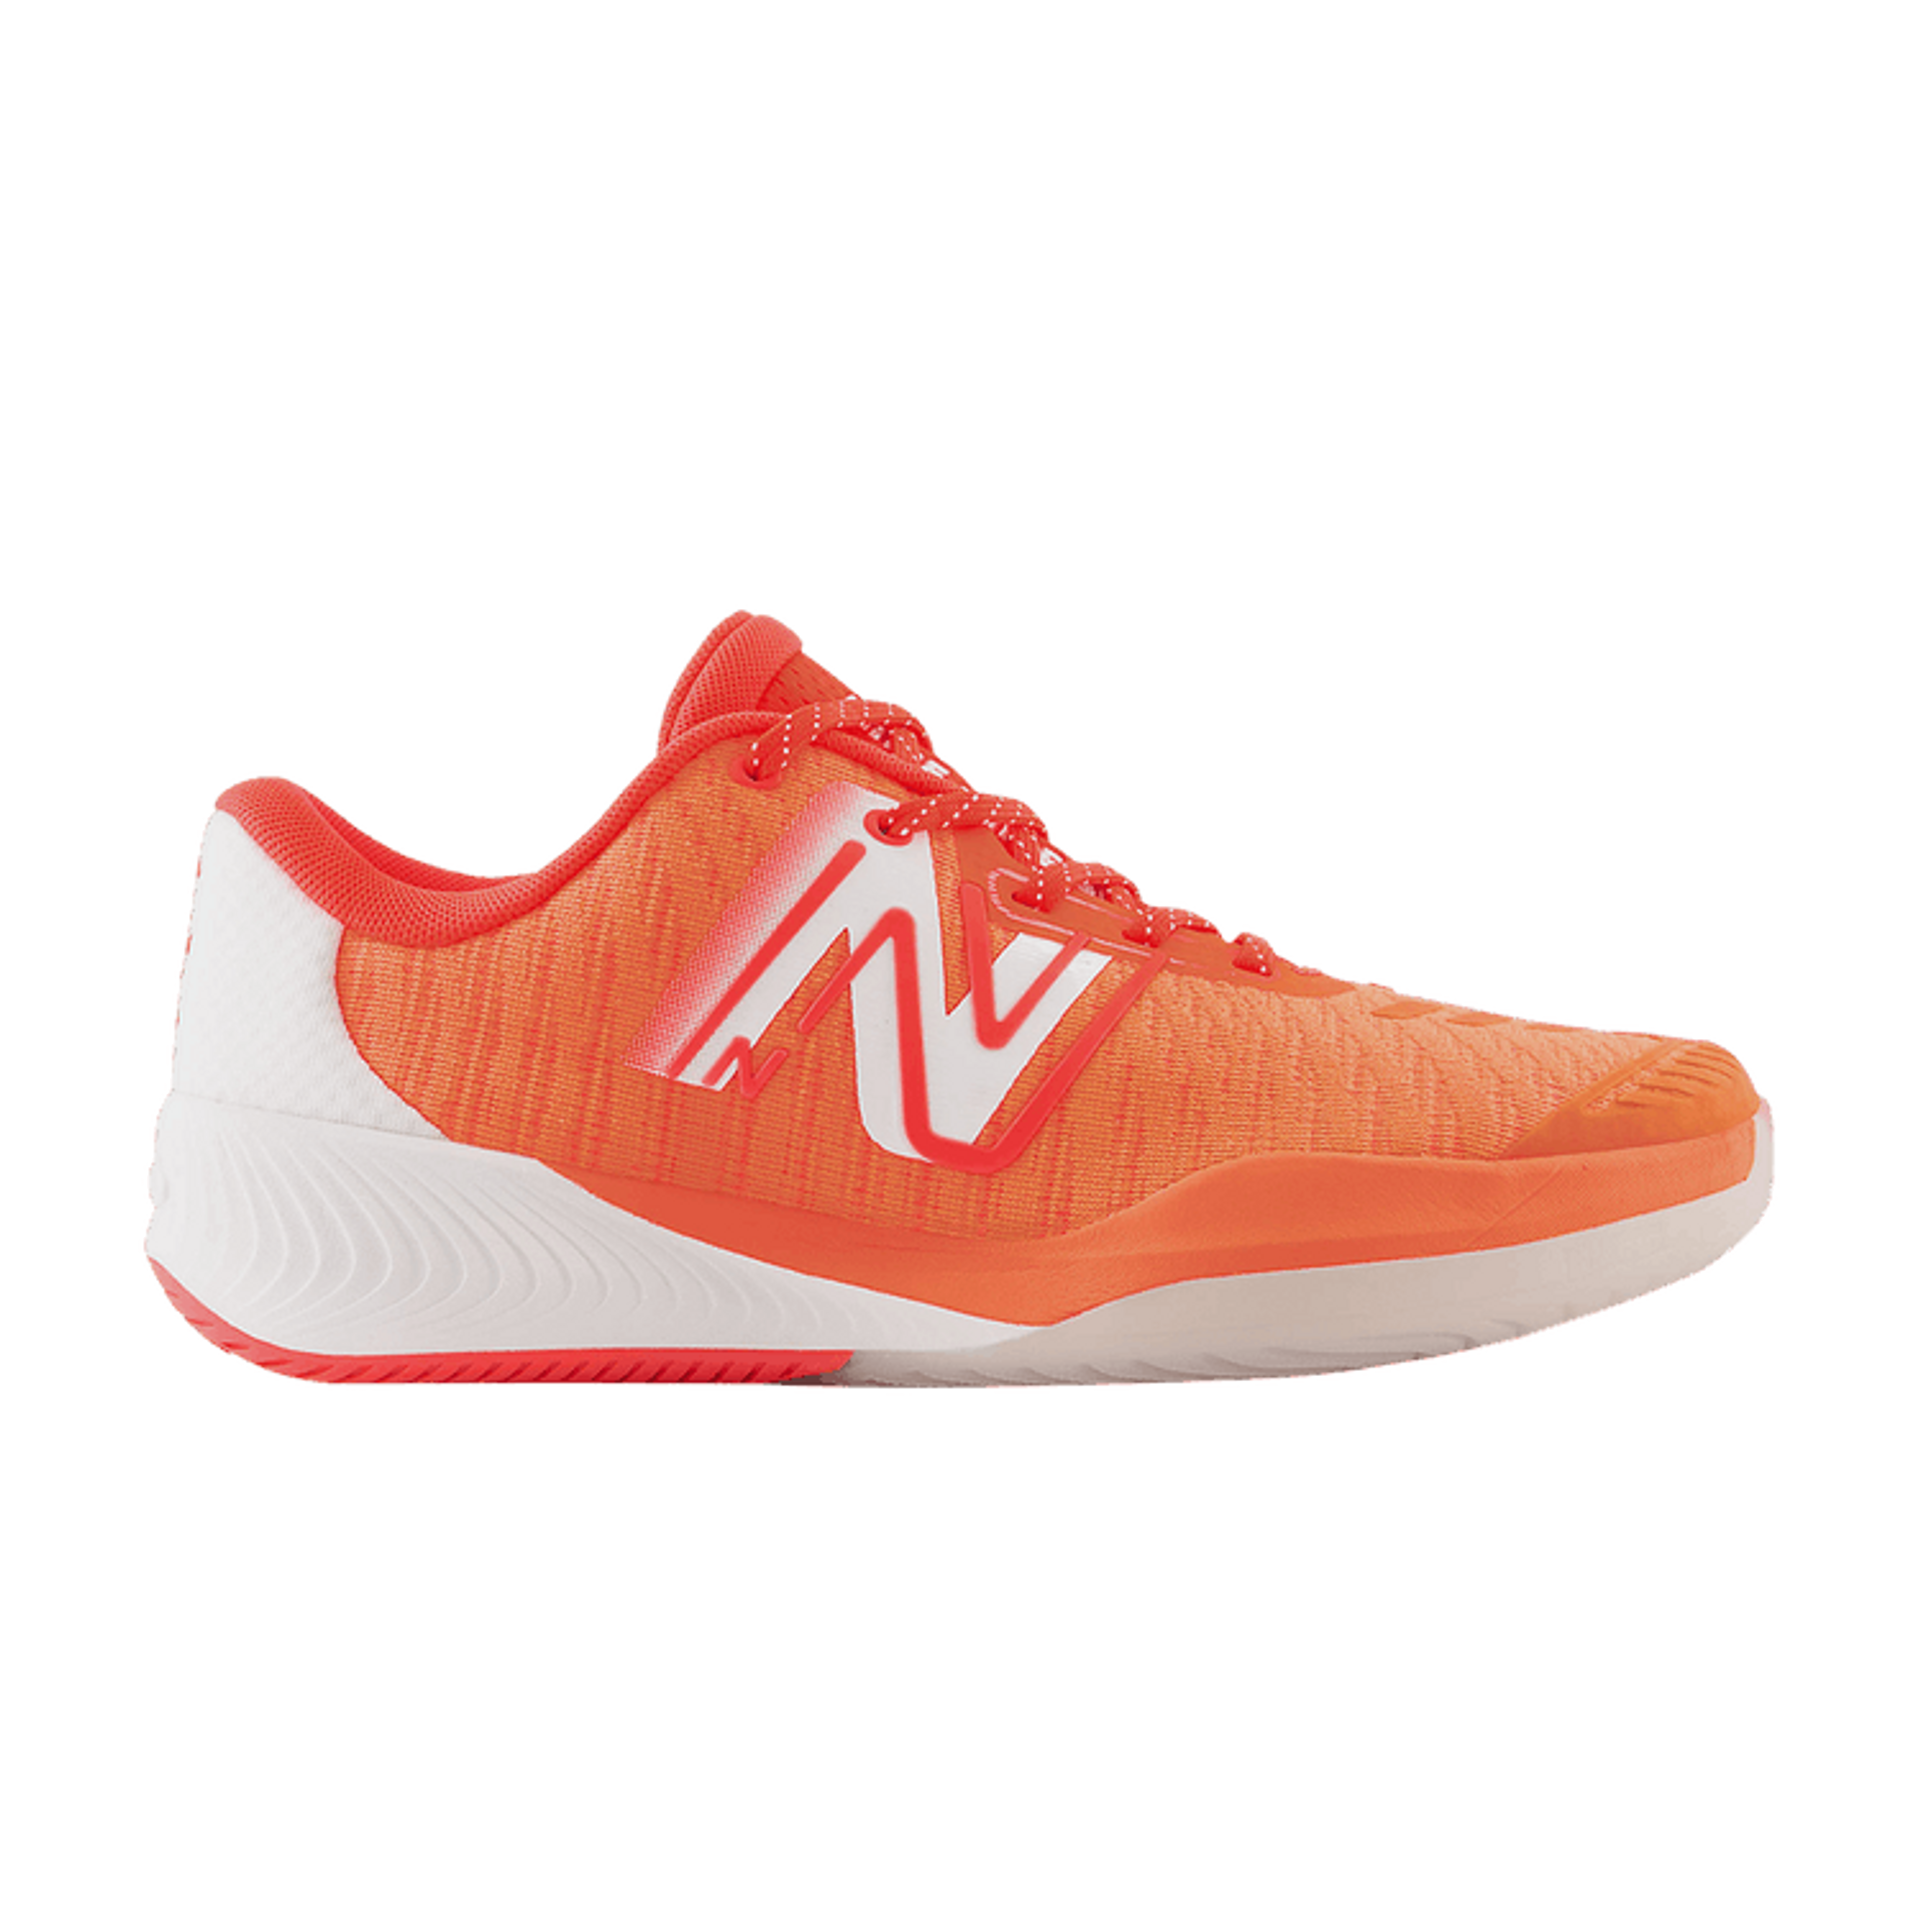 Wmns Fuel Cell 996v5 Wide 'Neon Dragonfly'